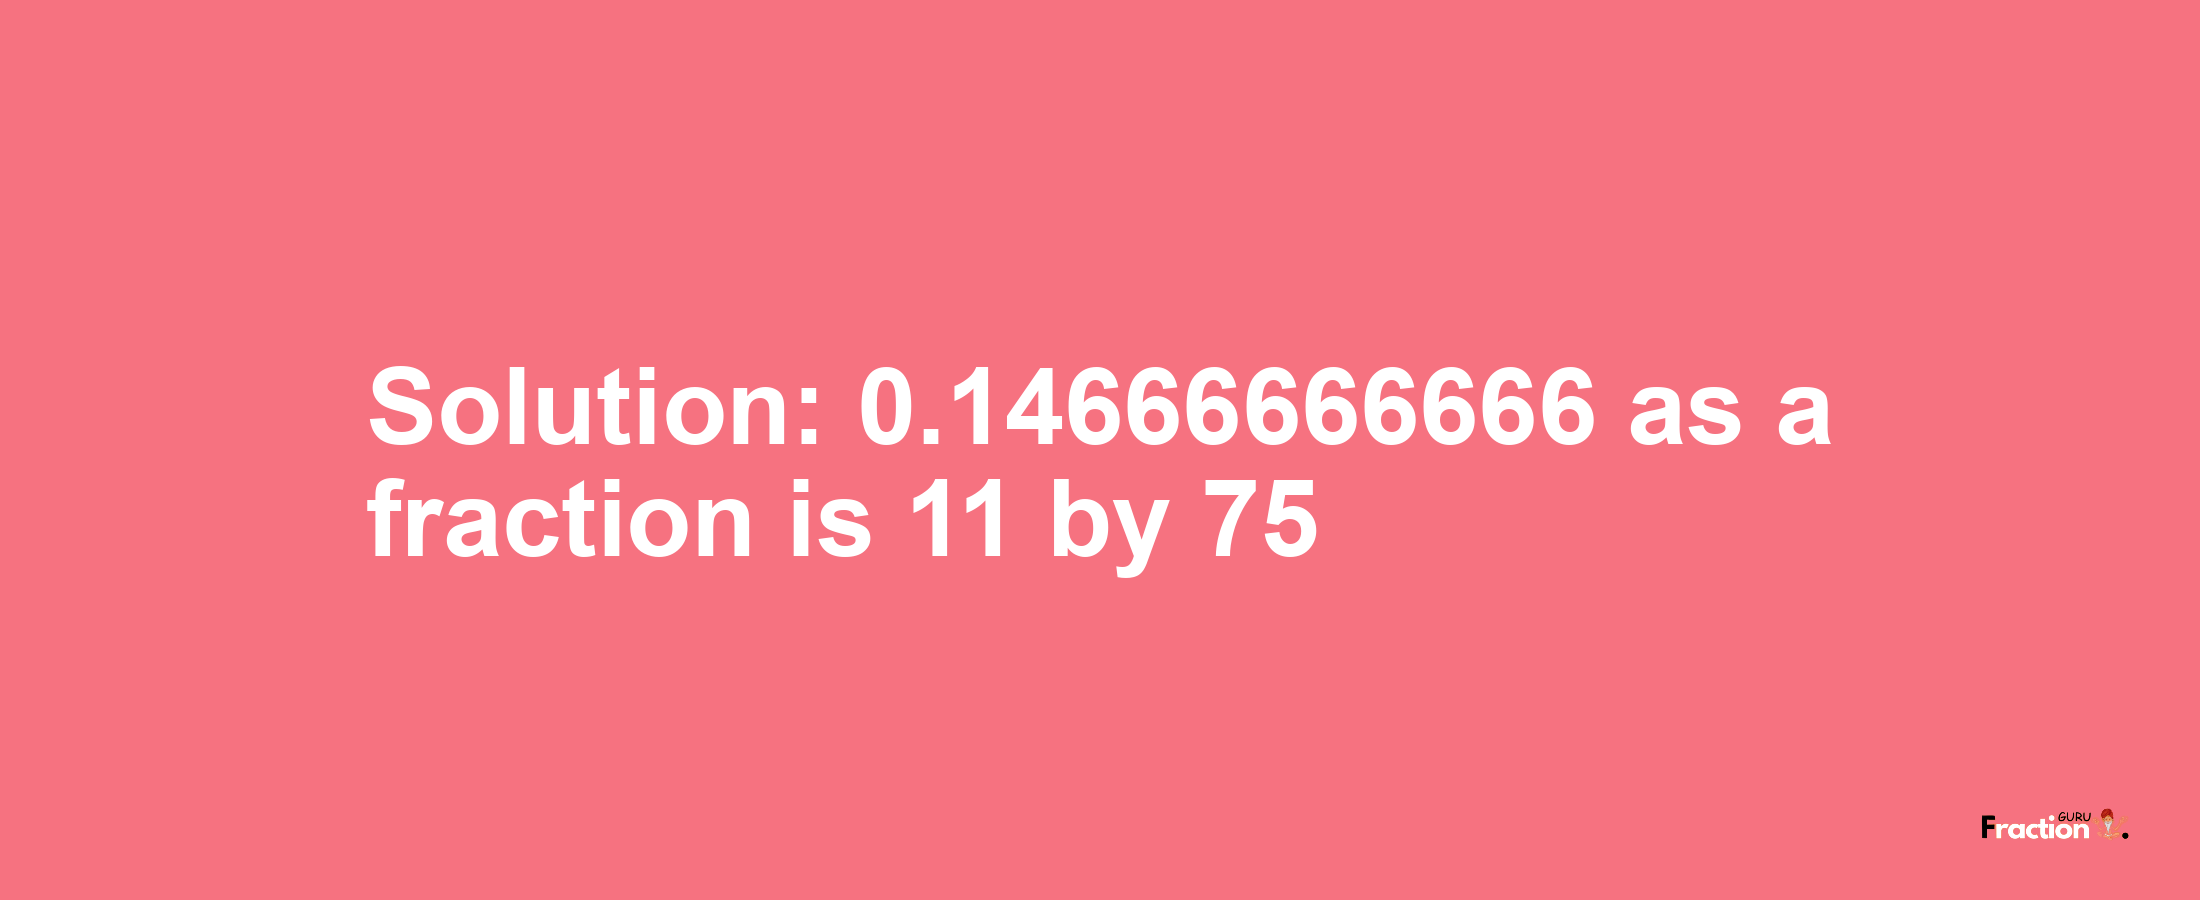 Solution:0.14666666666 as a fraction is 11/75